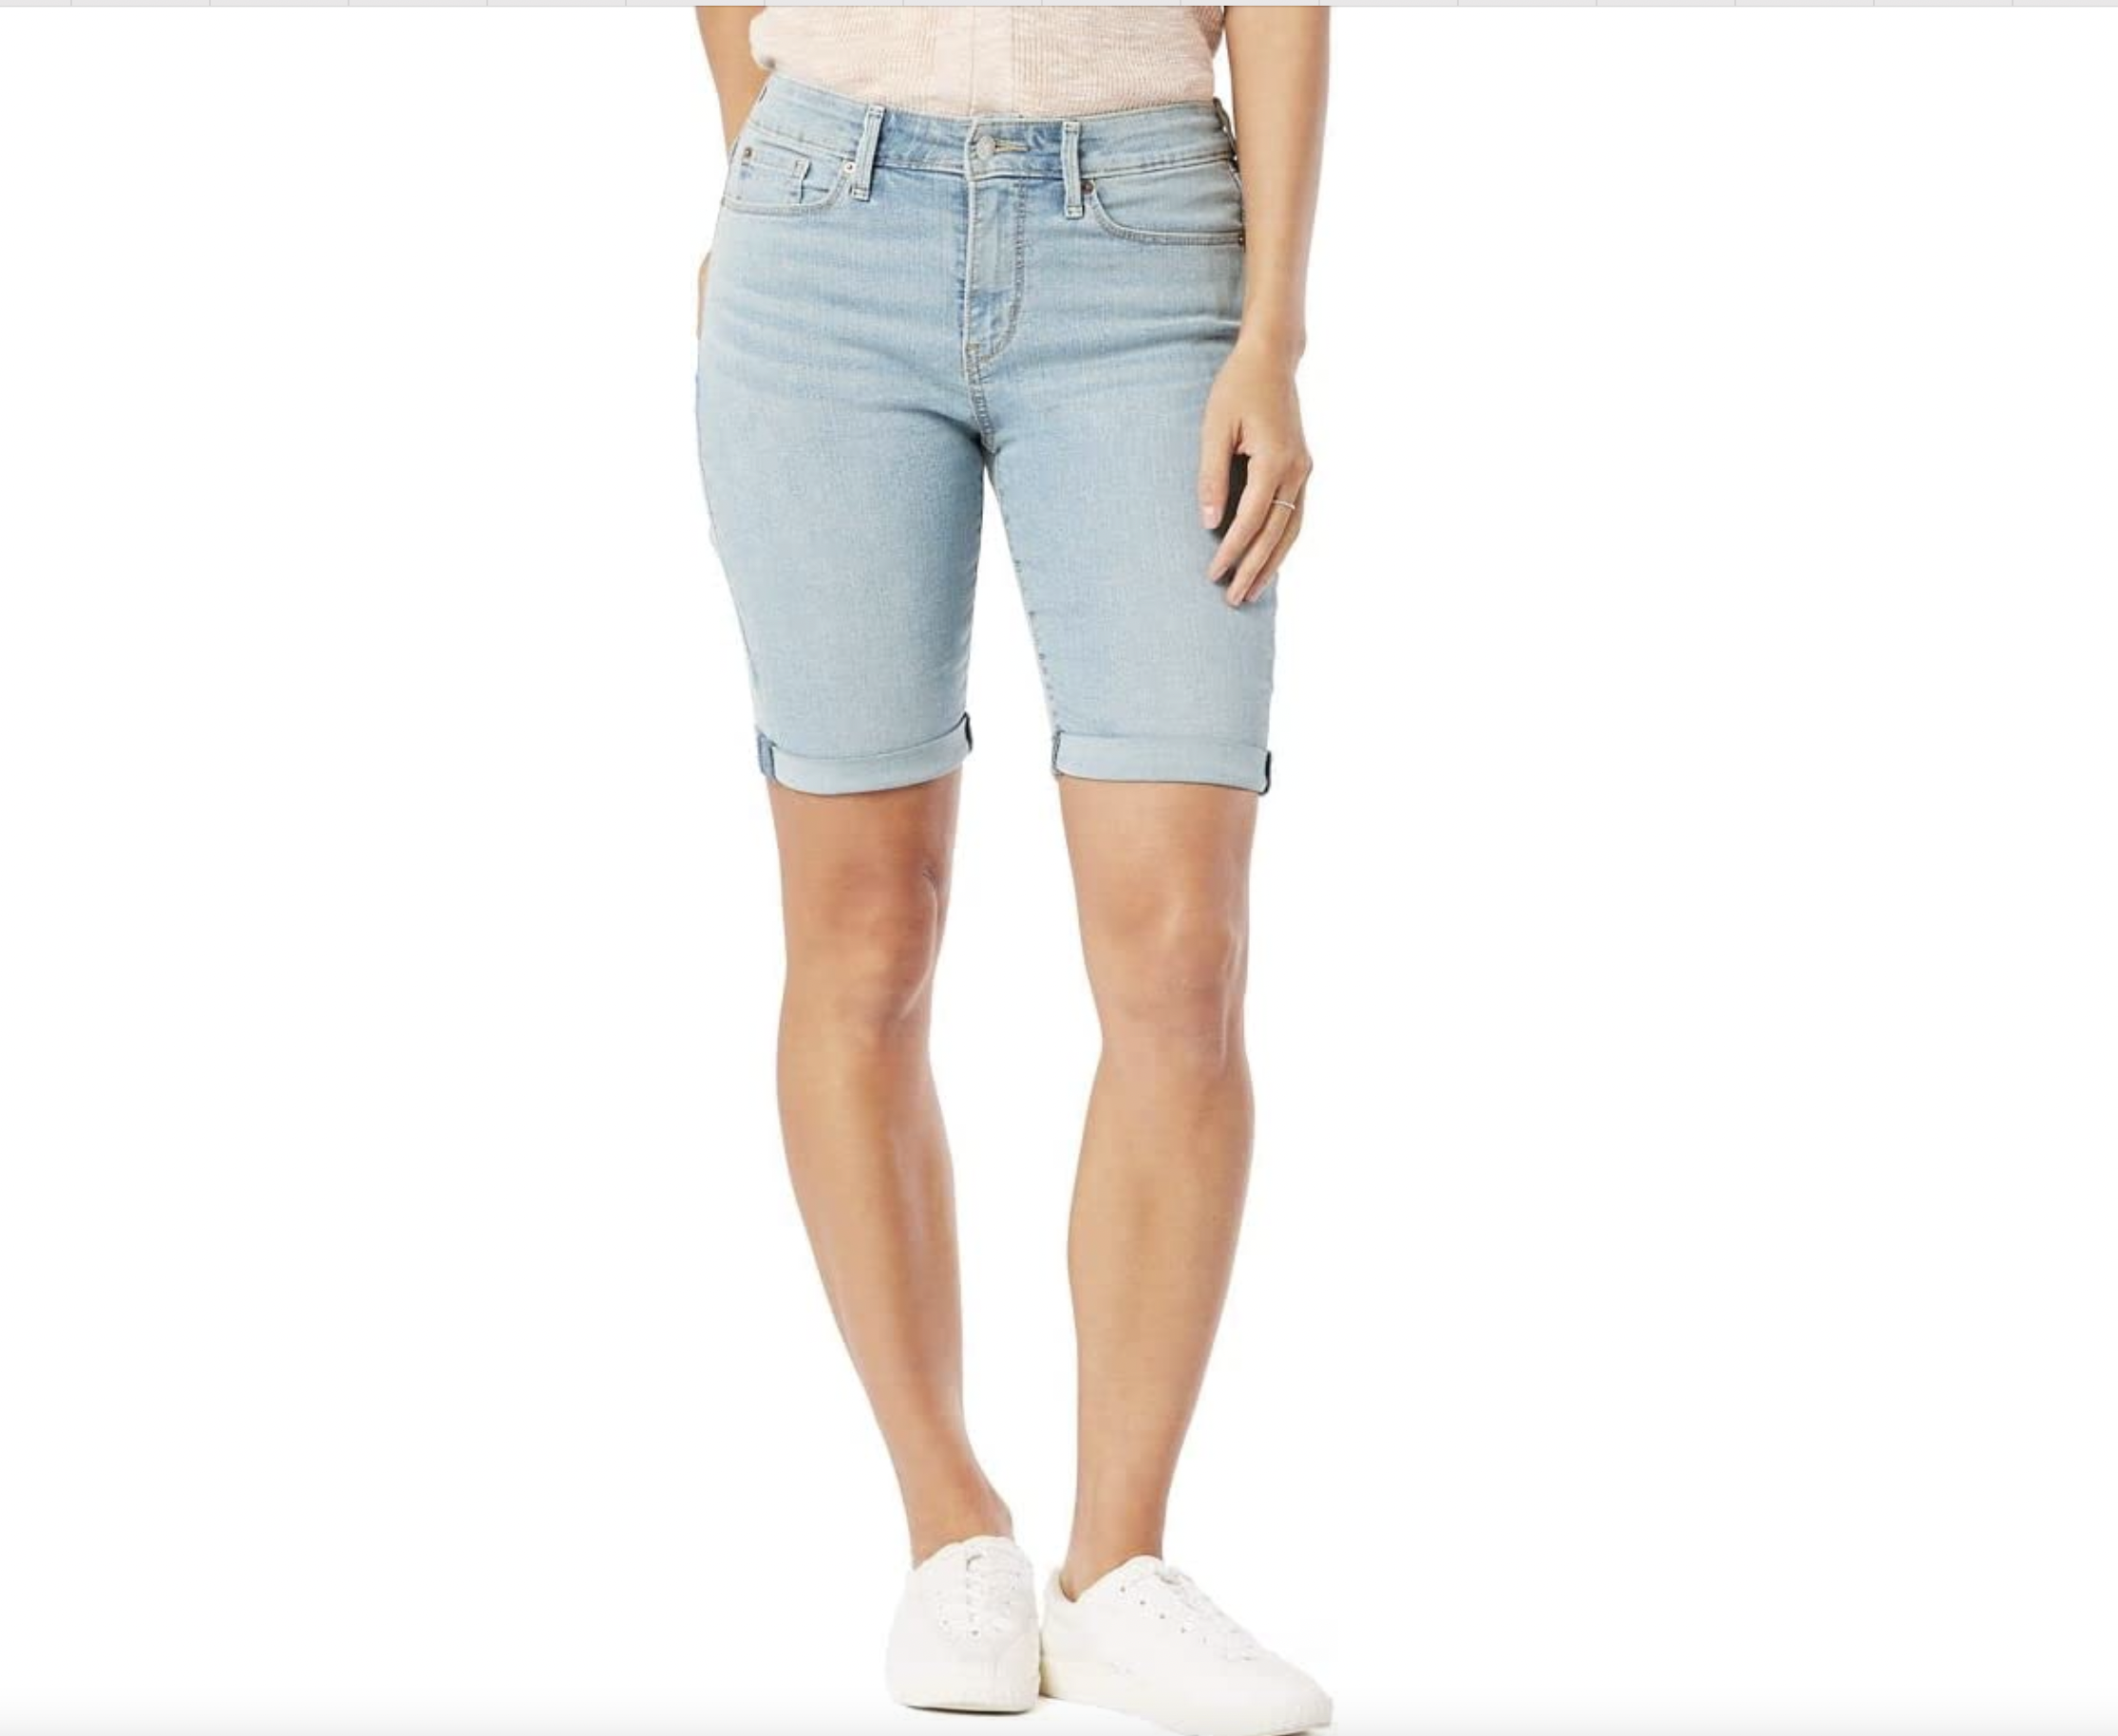 Denim Bermuda Shorts Are Back—Here's How to Style Them